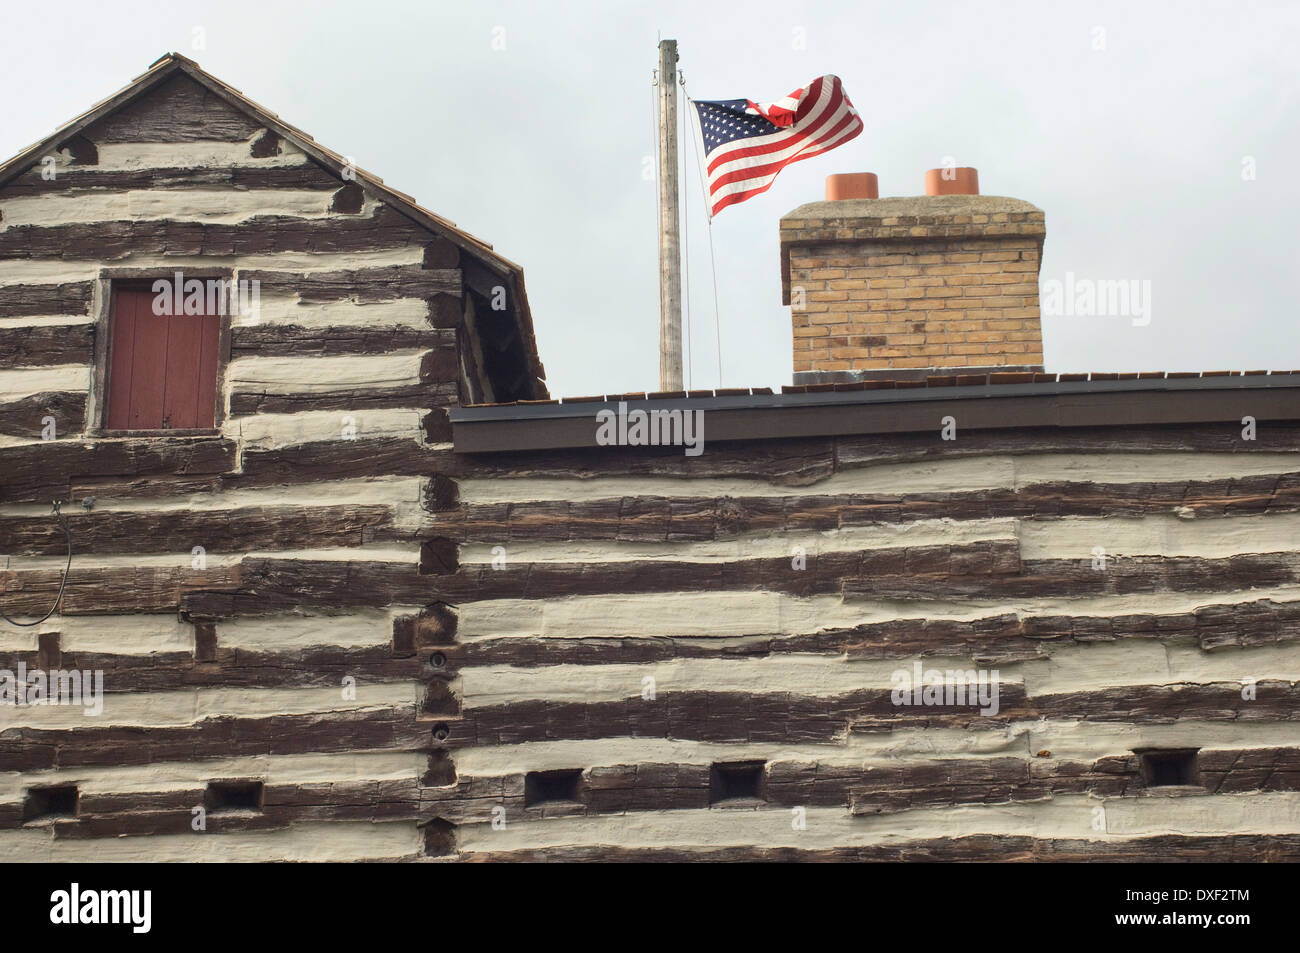 Replica detail of old Fort Wayne, built in 1815 on the Maumee River, Ft Wayne, Indiana. Digital photograph Stock Photo